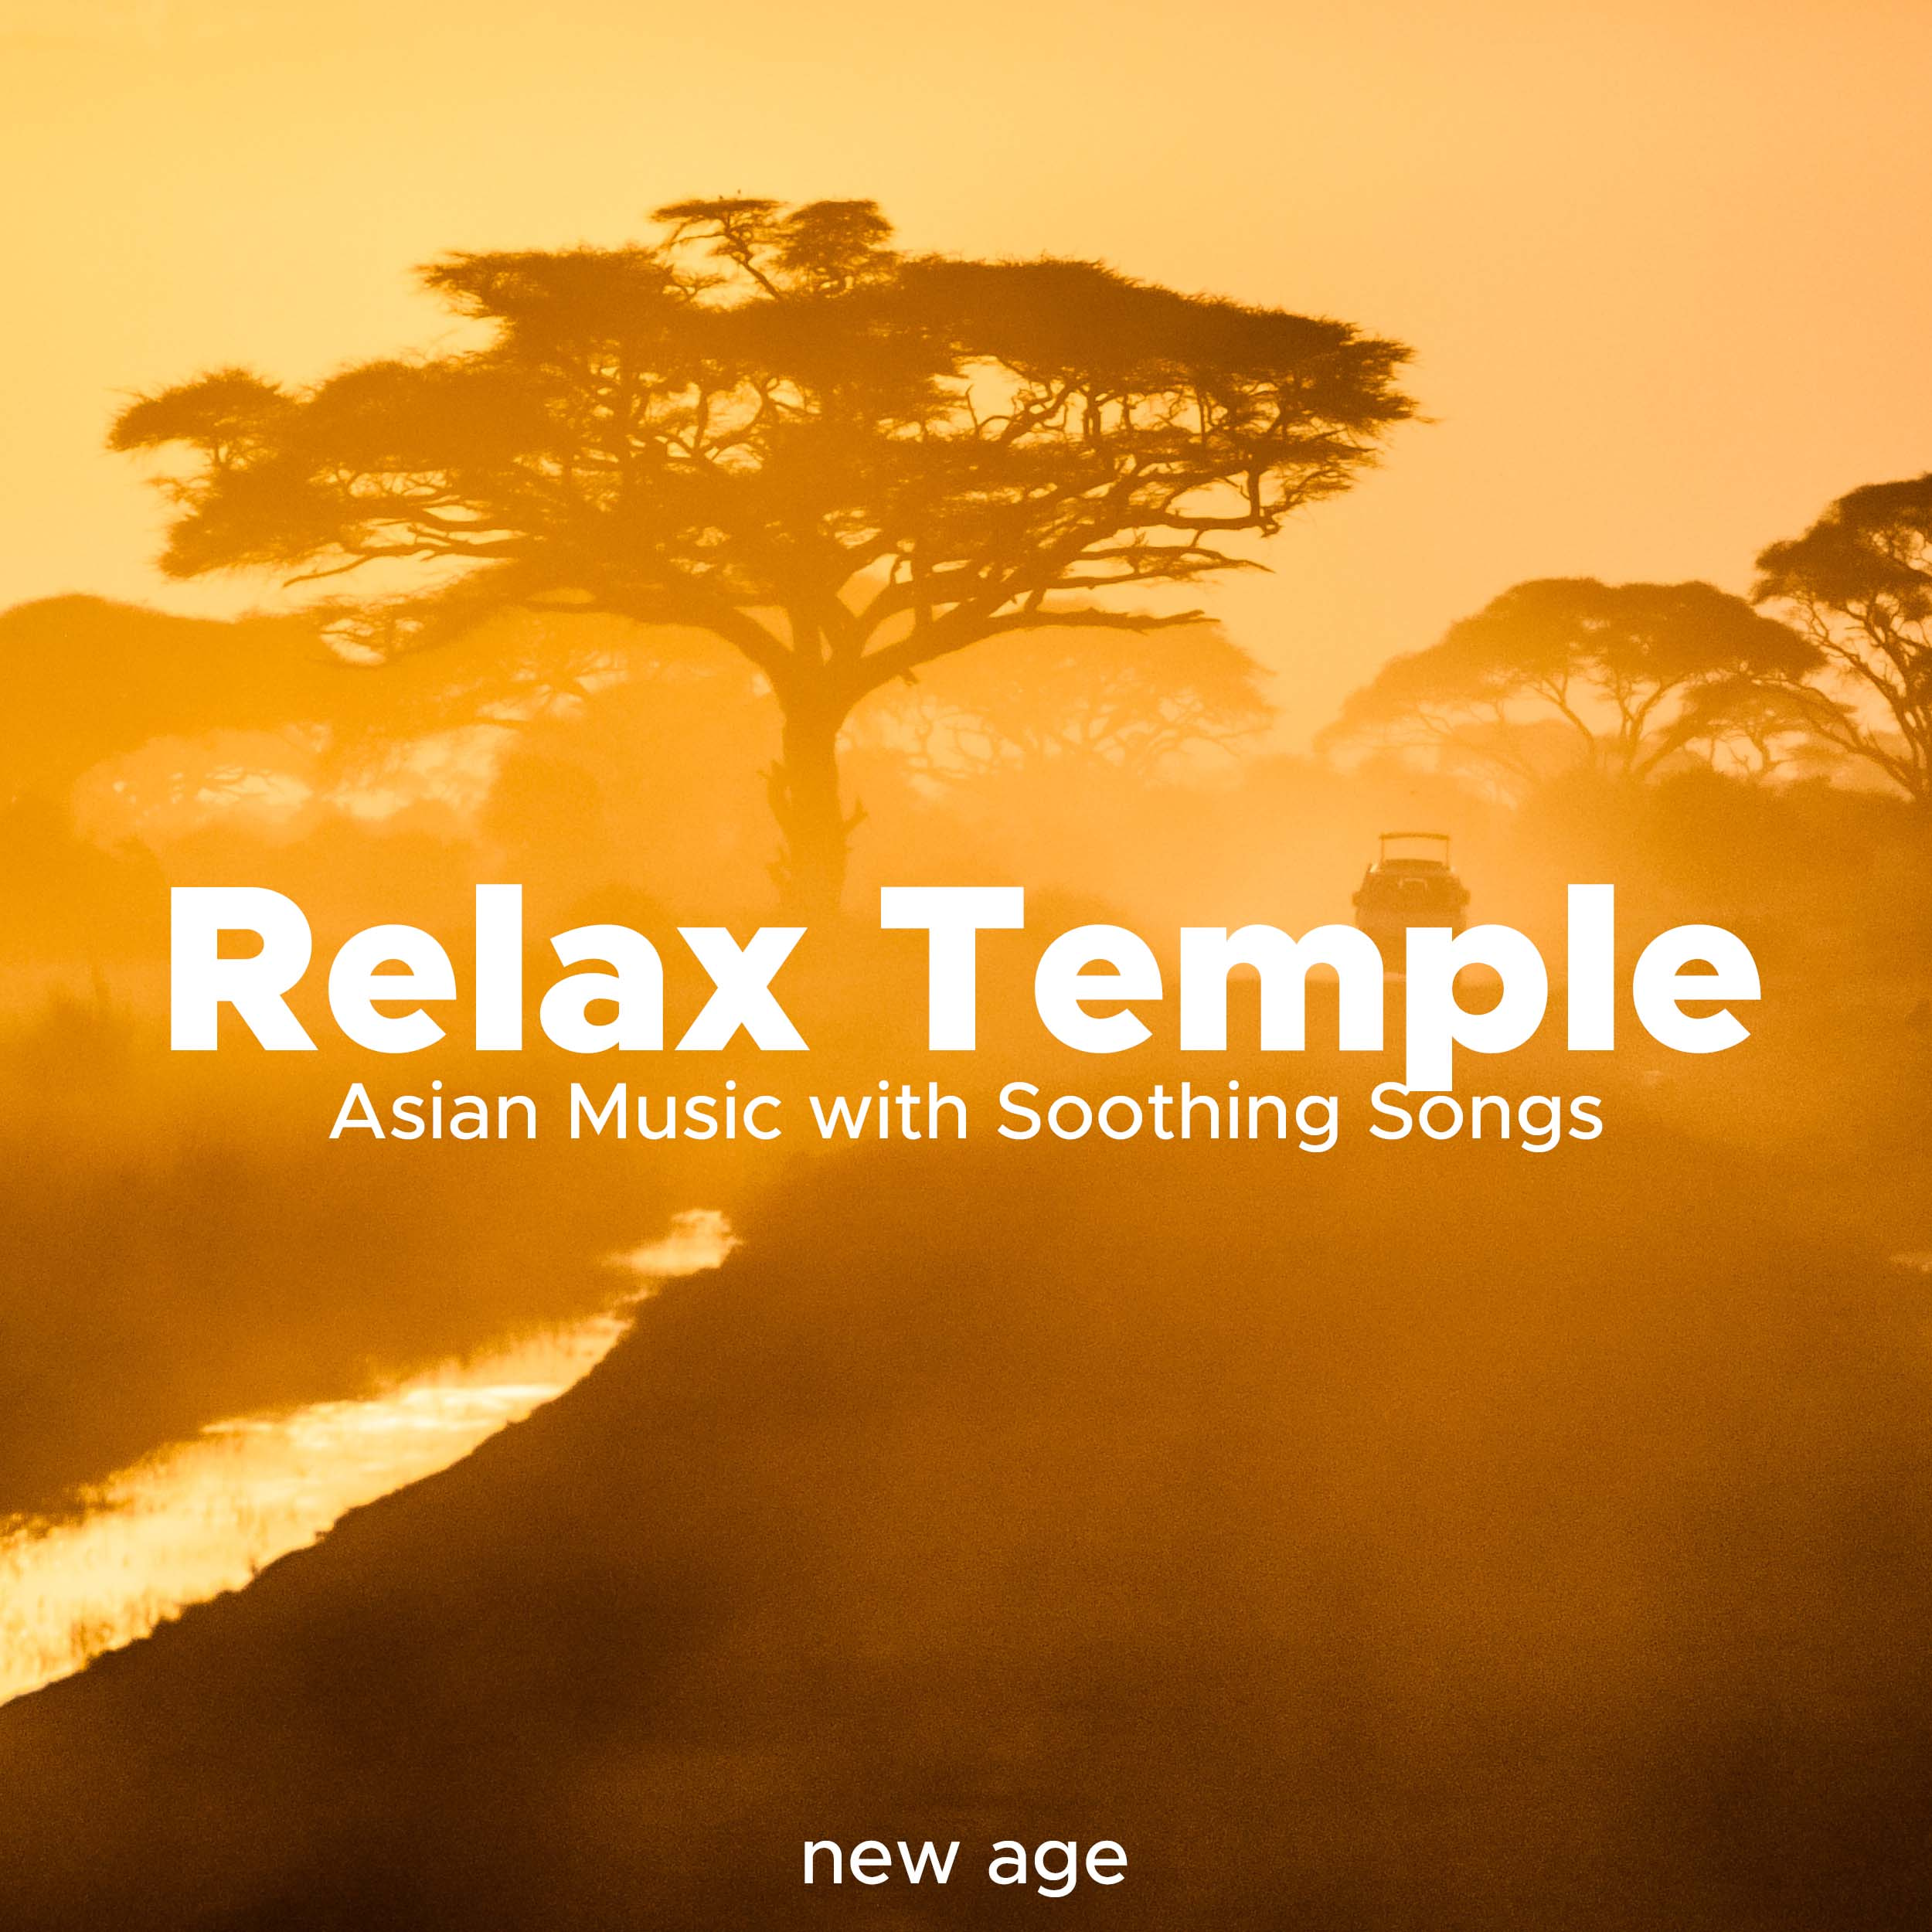 Relax Temple - Asian Music with Soothing Songs to Relieve your Daily Stress